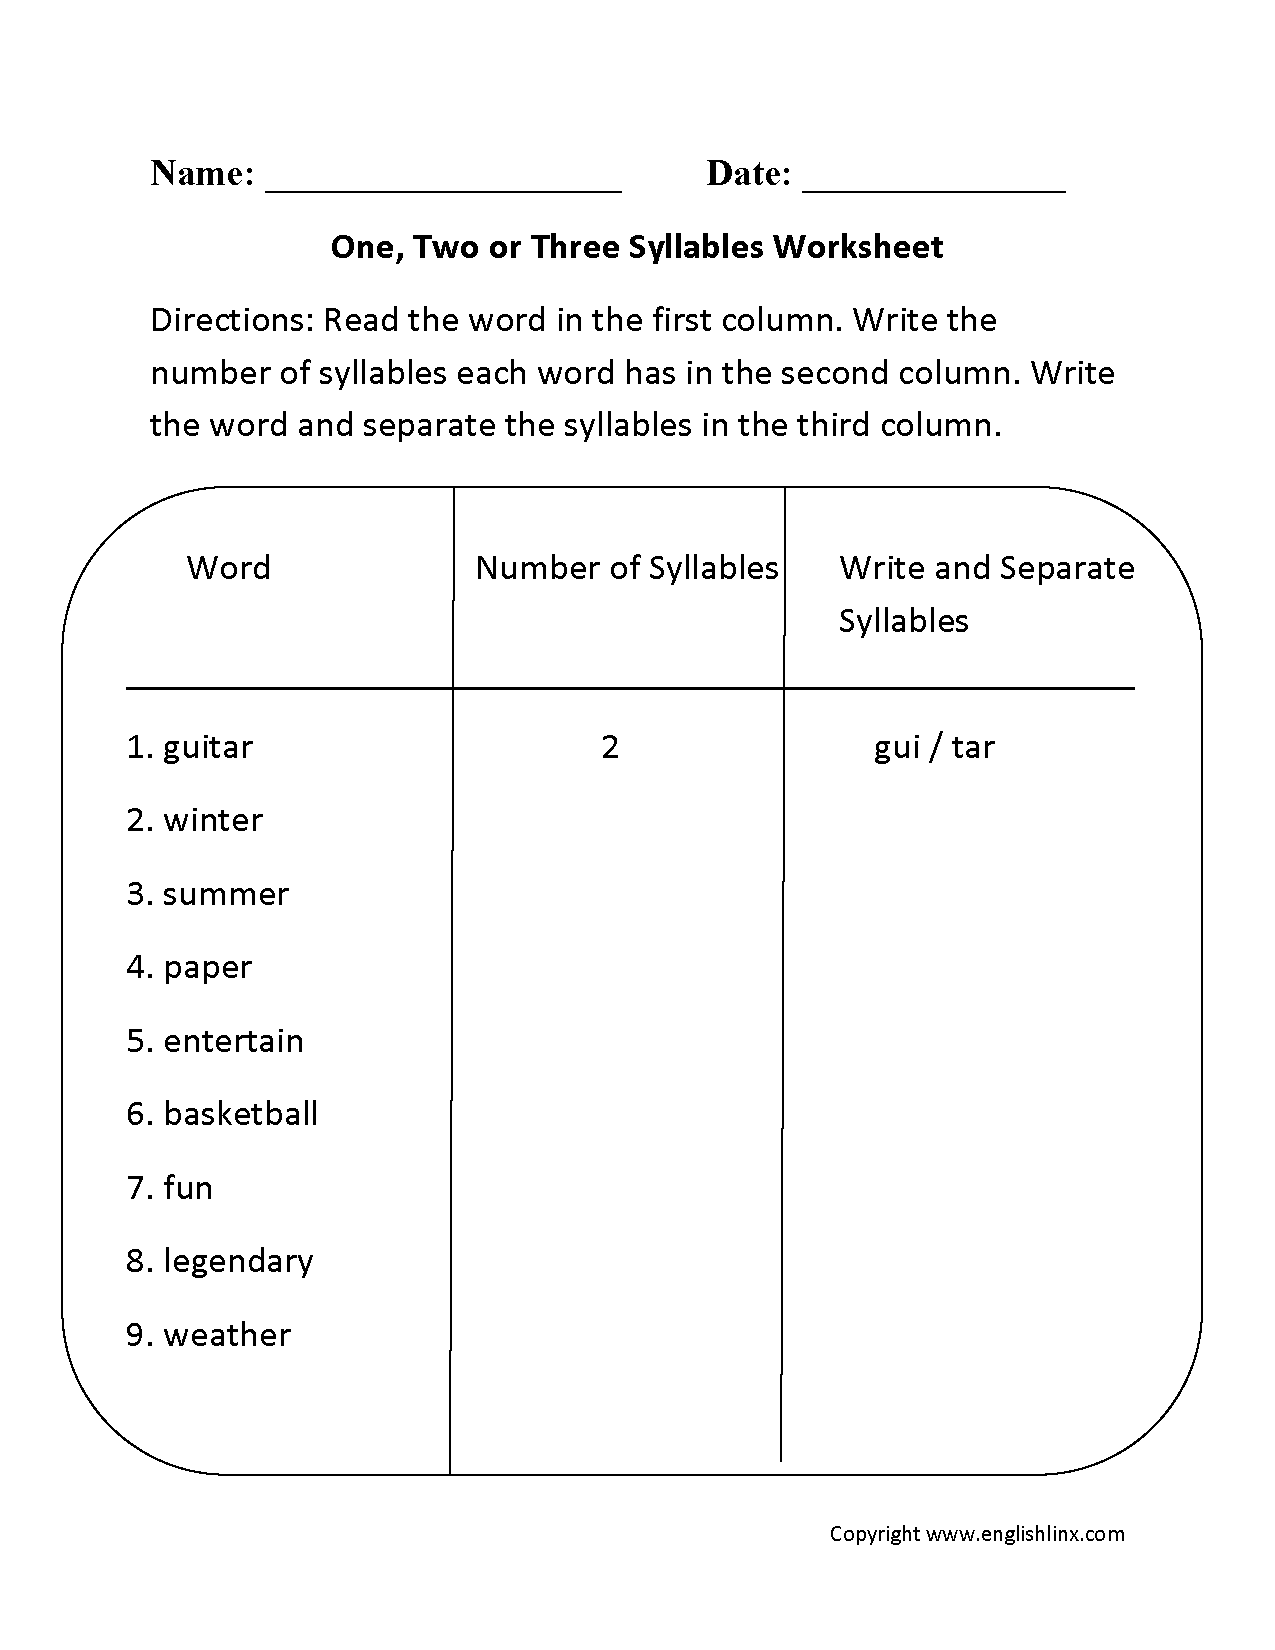 One, Two or Three Syllables Worksheet